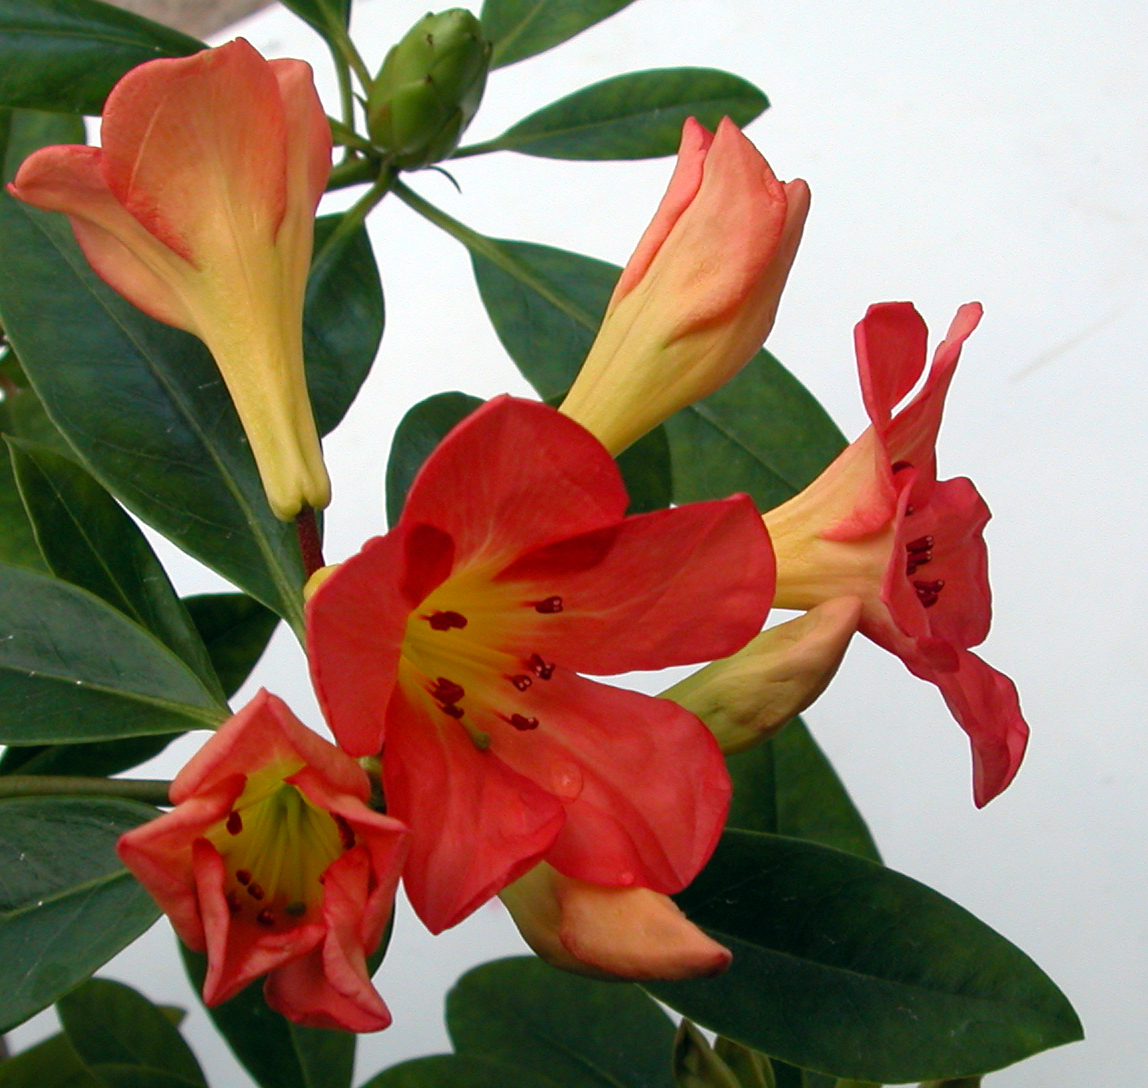 CORAL SEAS VIREYA RHODODENDRONS FOR INDOORS Vireya Rhododendrons for indoors